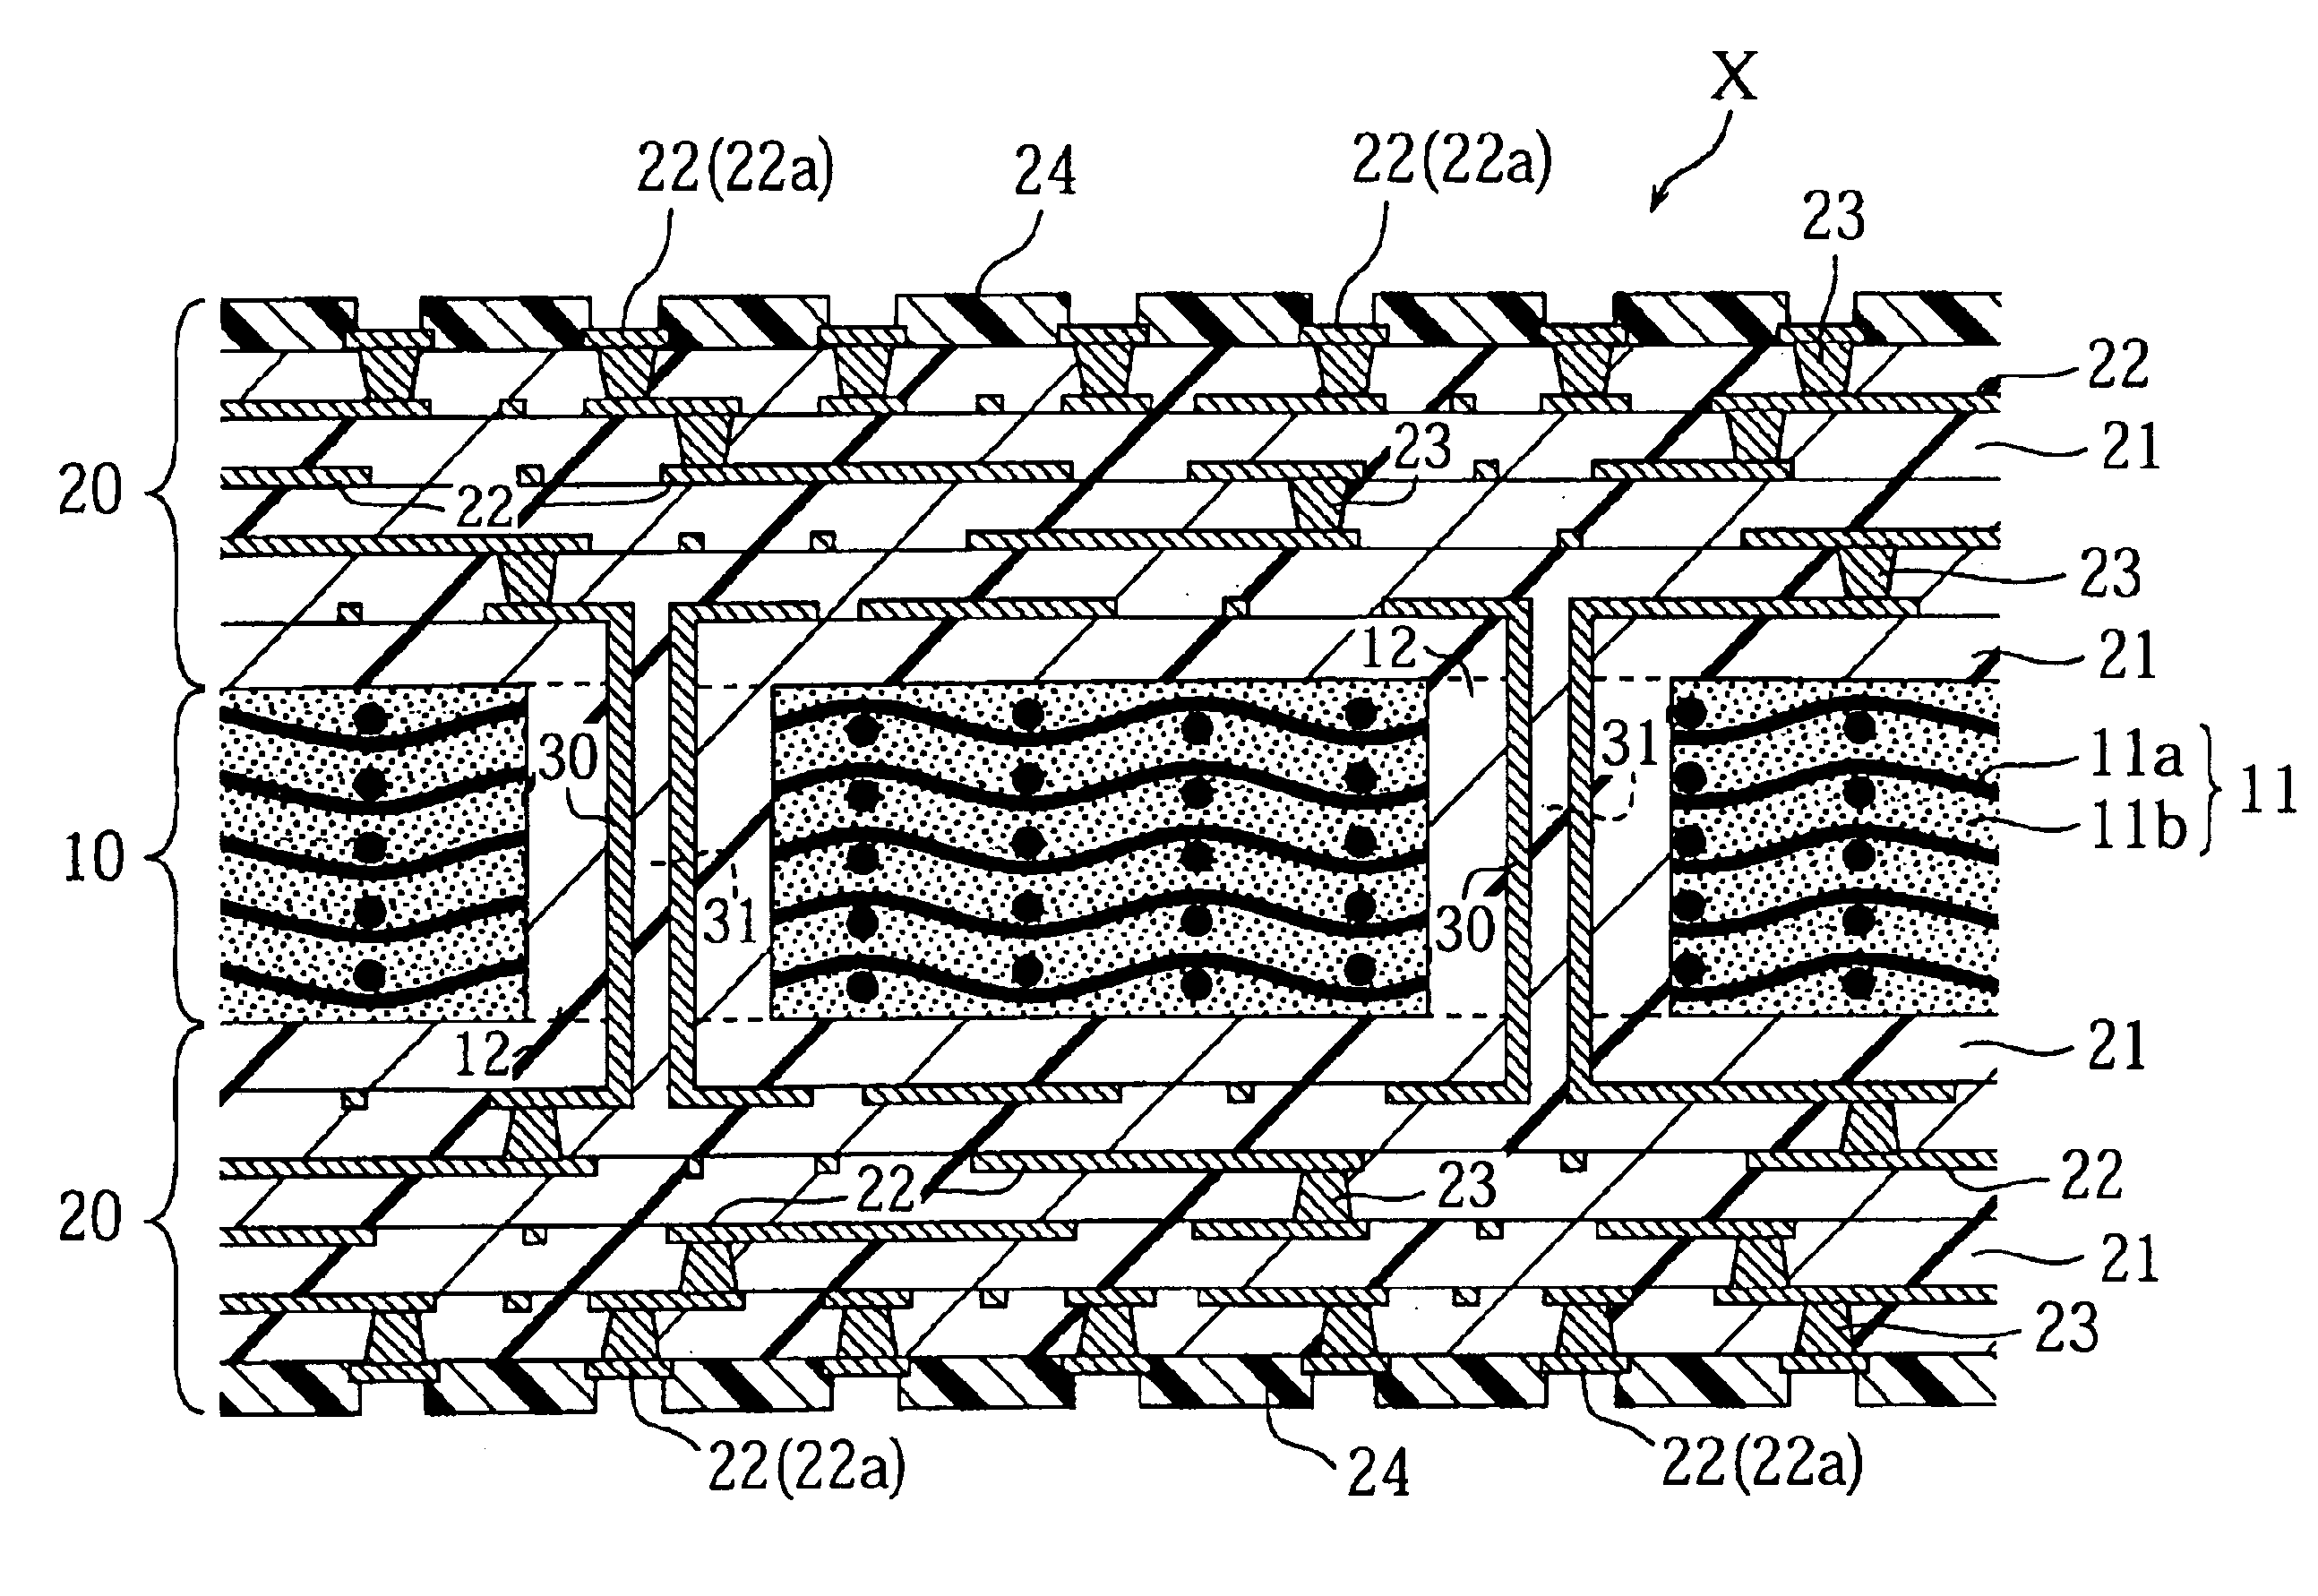 Wiring board with core layer containing inorganic filler